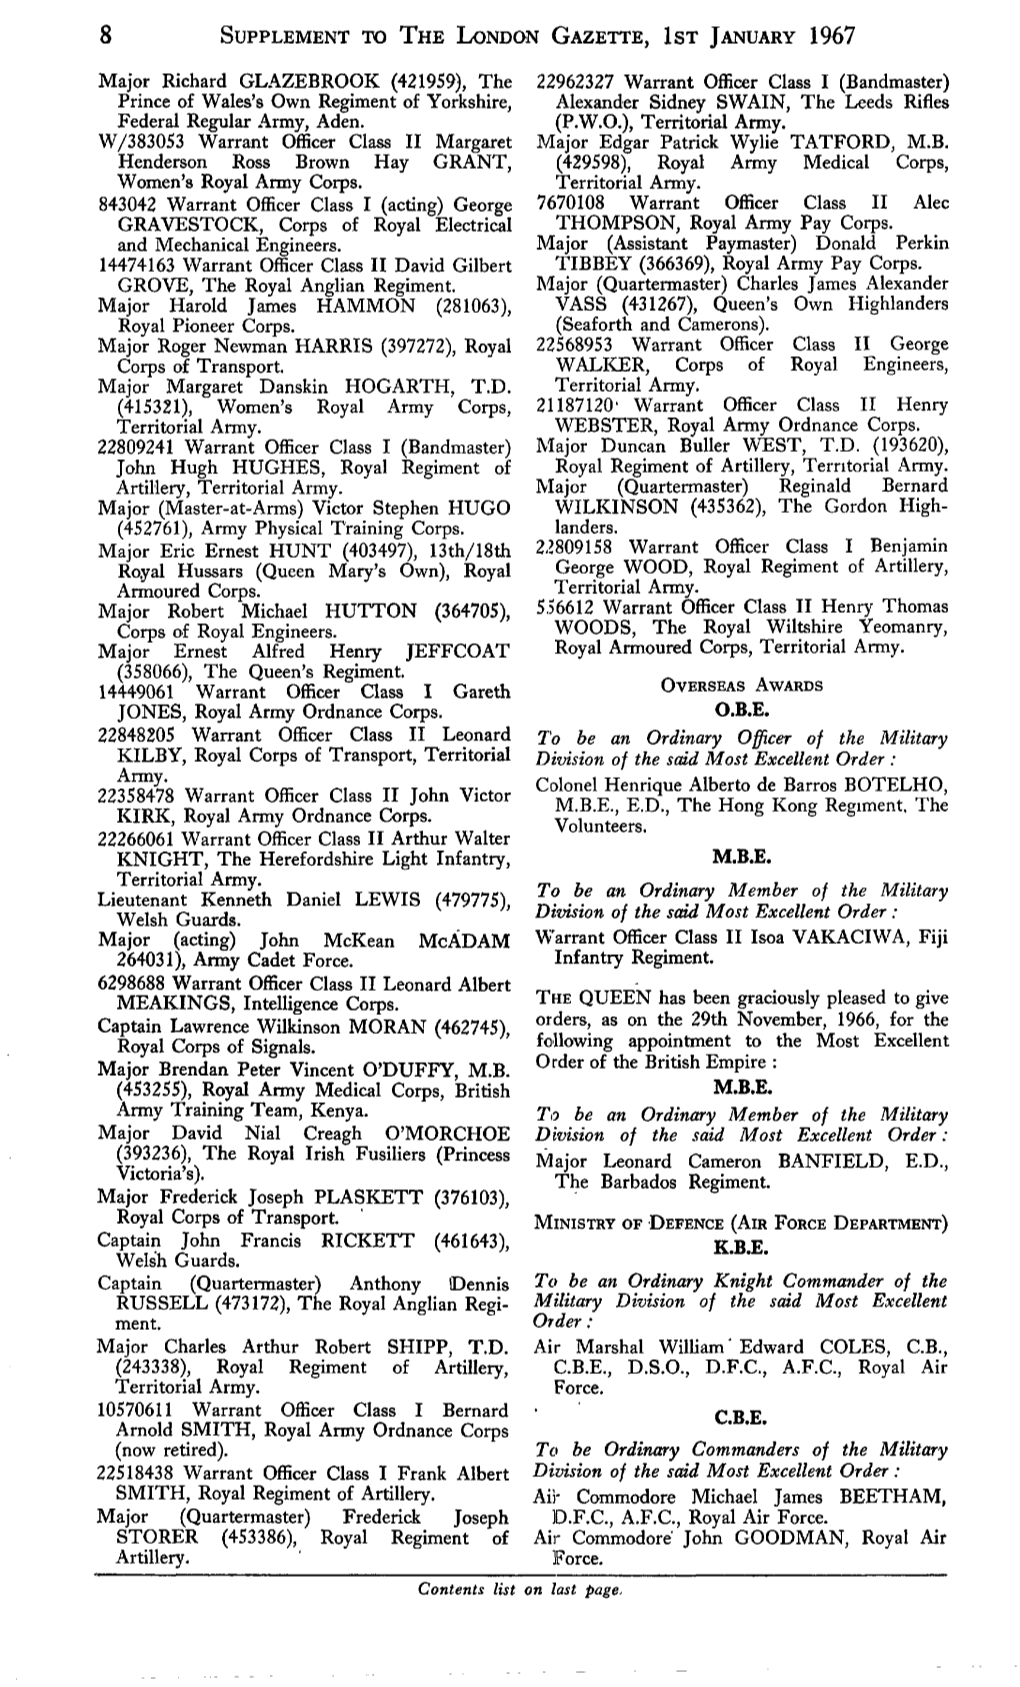 8 Supplement to the London Gazette, Ist January 1967